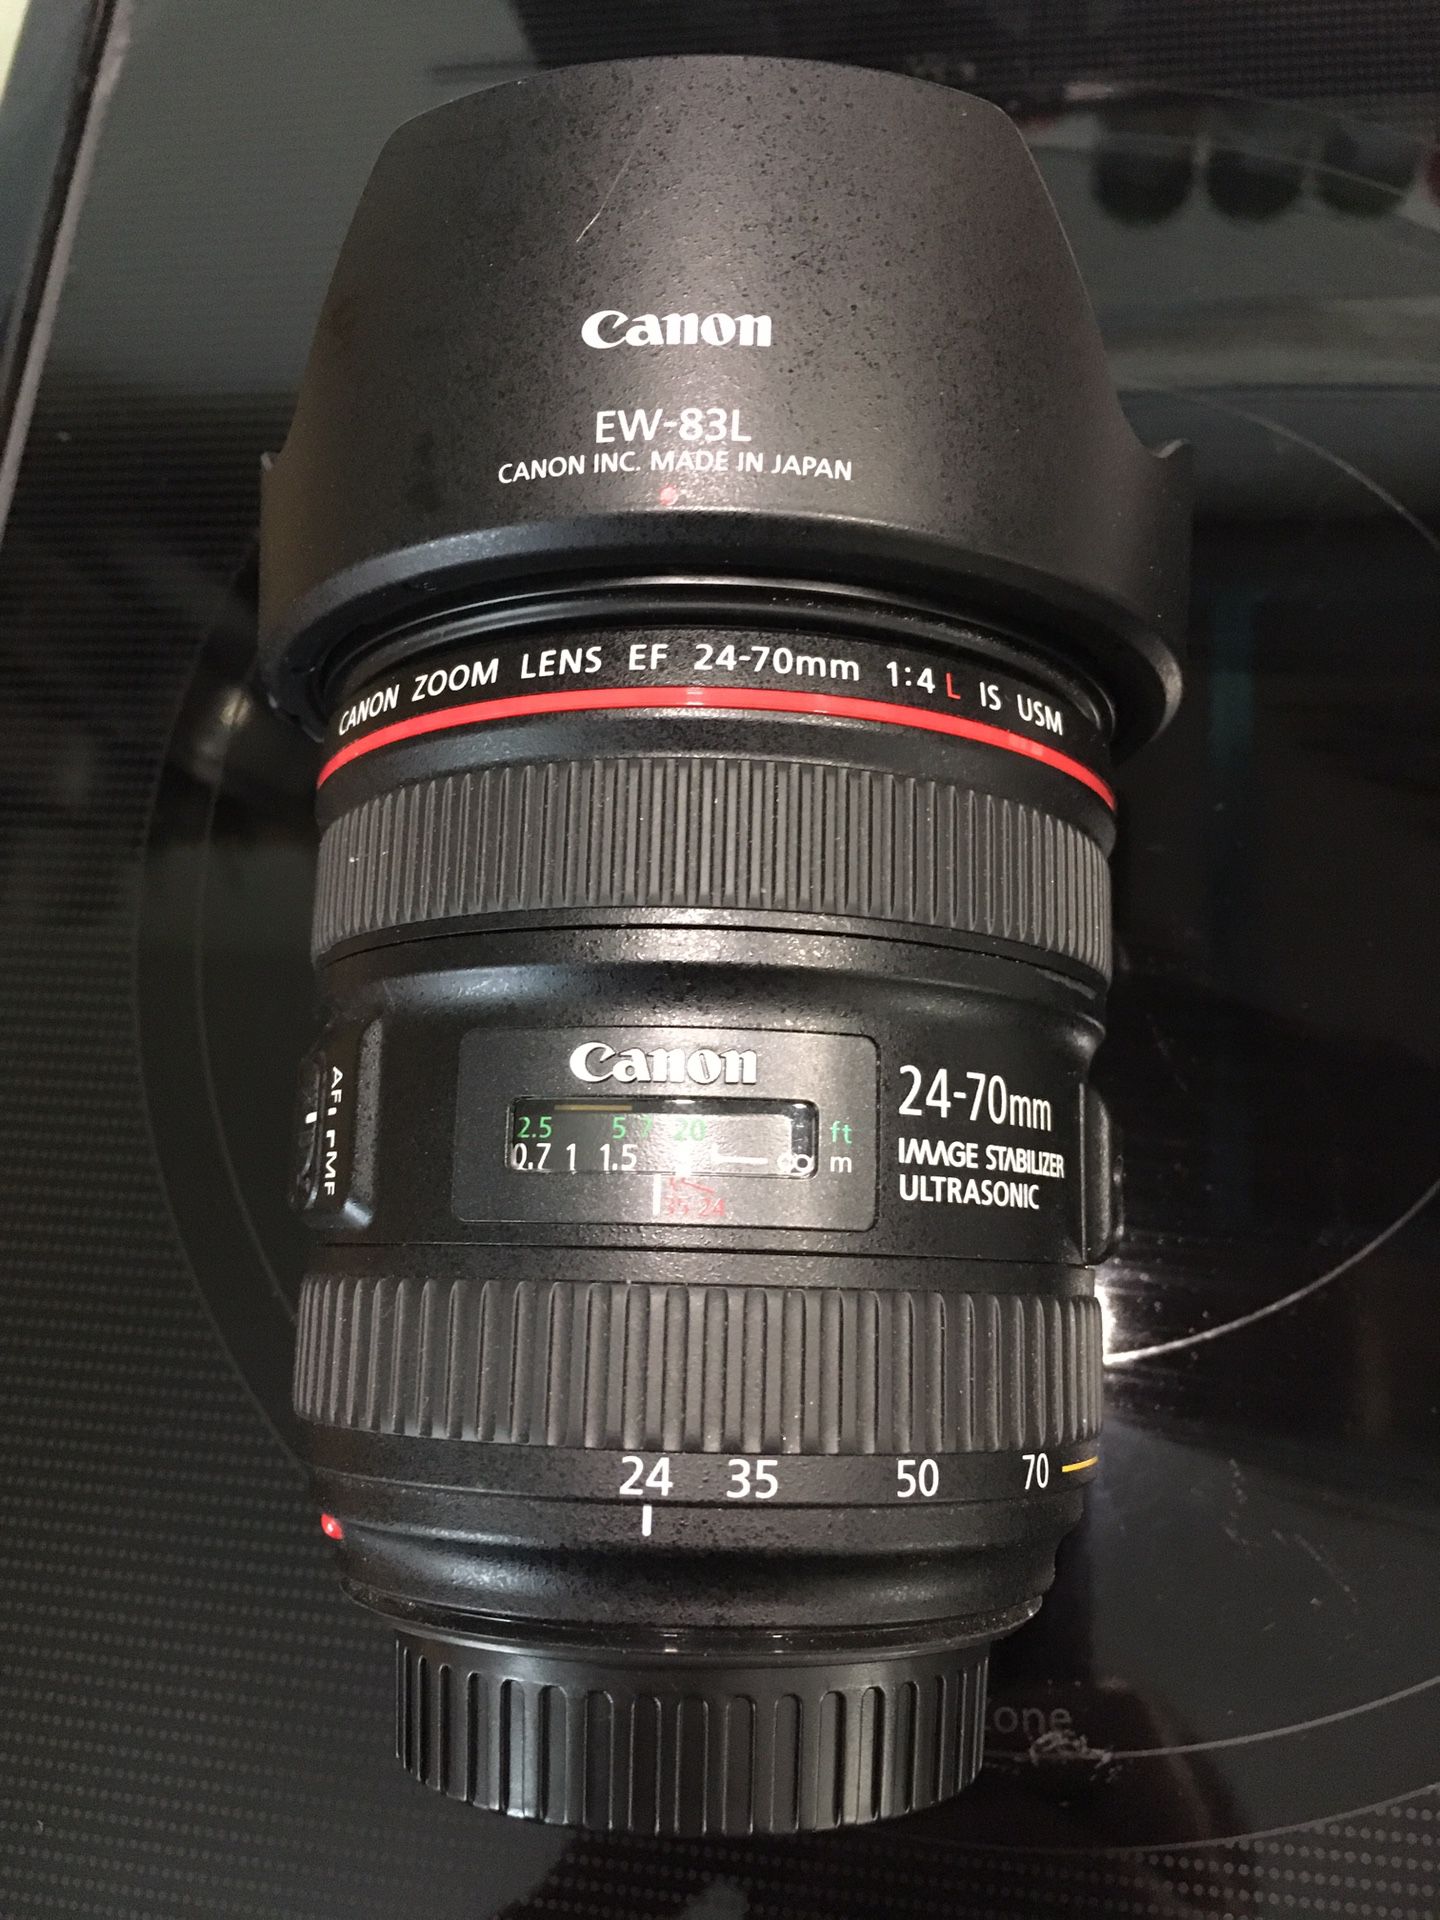 Canon 24-70mm F4 L IS USM lens